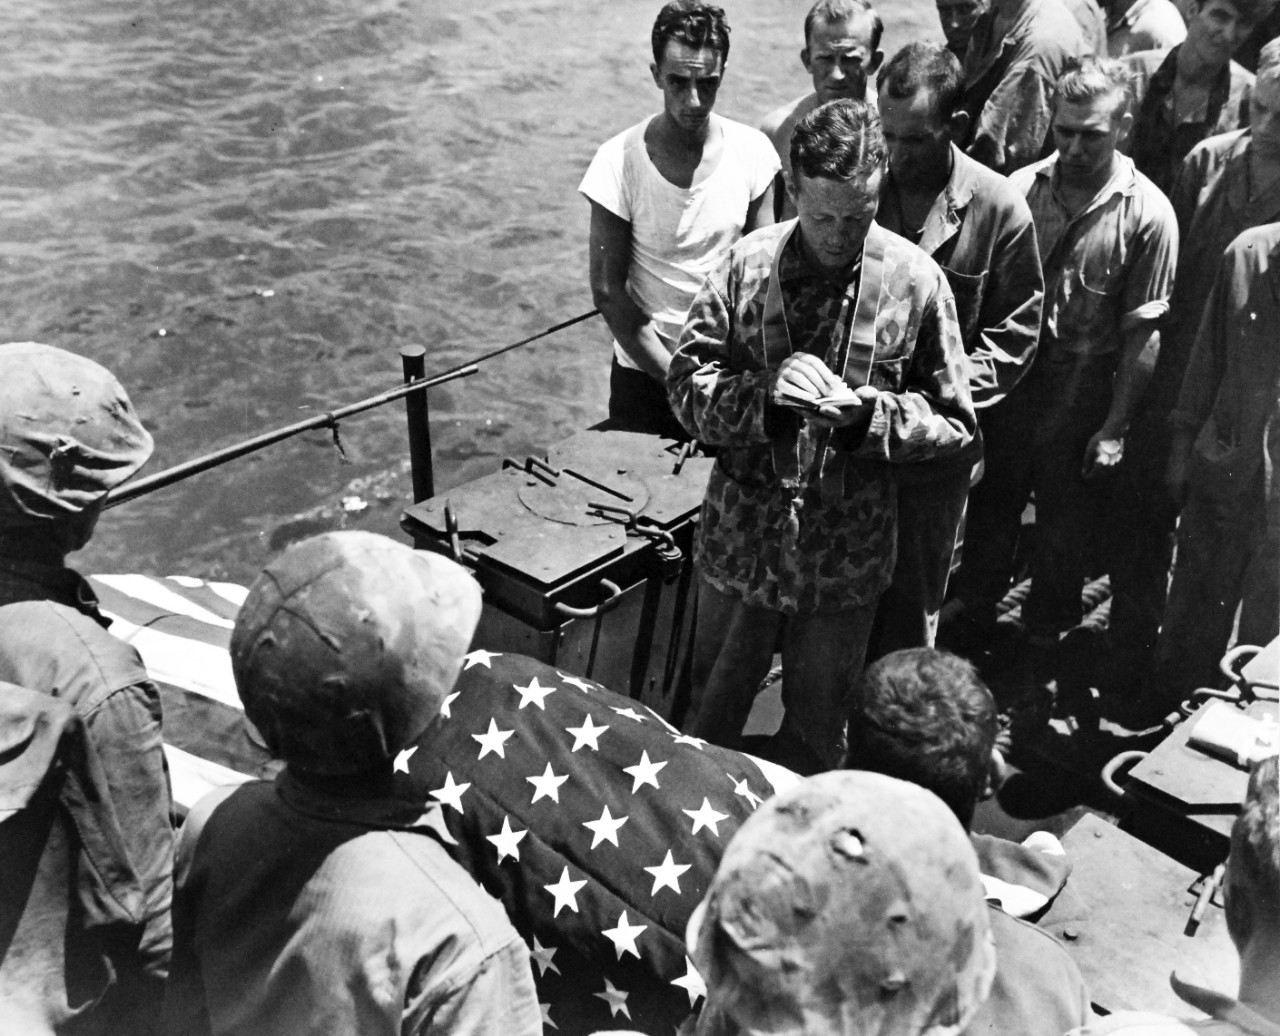 80-G-239299:  Invasion of Tinian, July-August 1944.   A U.S. Marine who died in the assault on Tinian Island is given the highest military honor – burial at sea.  Lieutenant Joseph P. F. Gallagher, USNR, Catholic Chaplain attached to the Second Marine Division reads the burial prayers, released  August 4, 1944.    Official U.S. Navy photograph, now in the collections of the National Archives.  (2017/03/07).